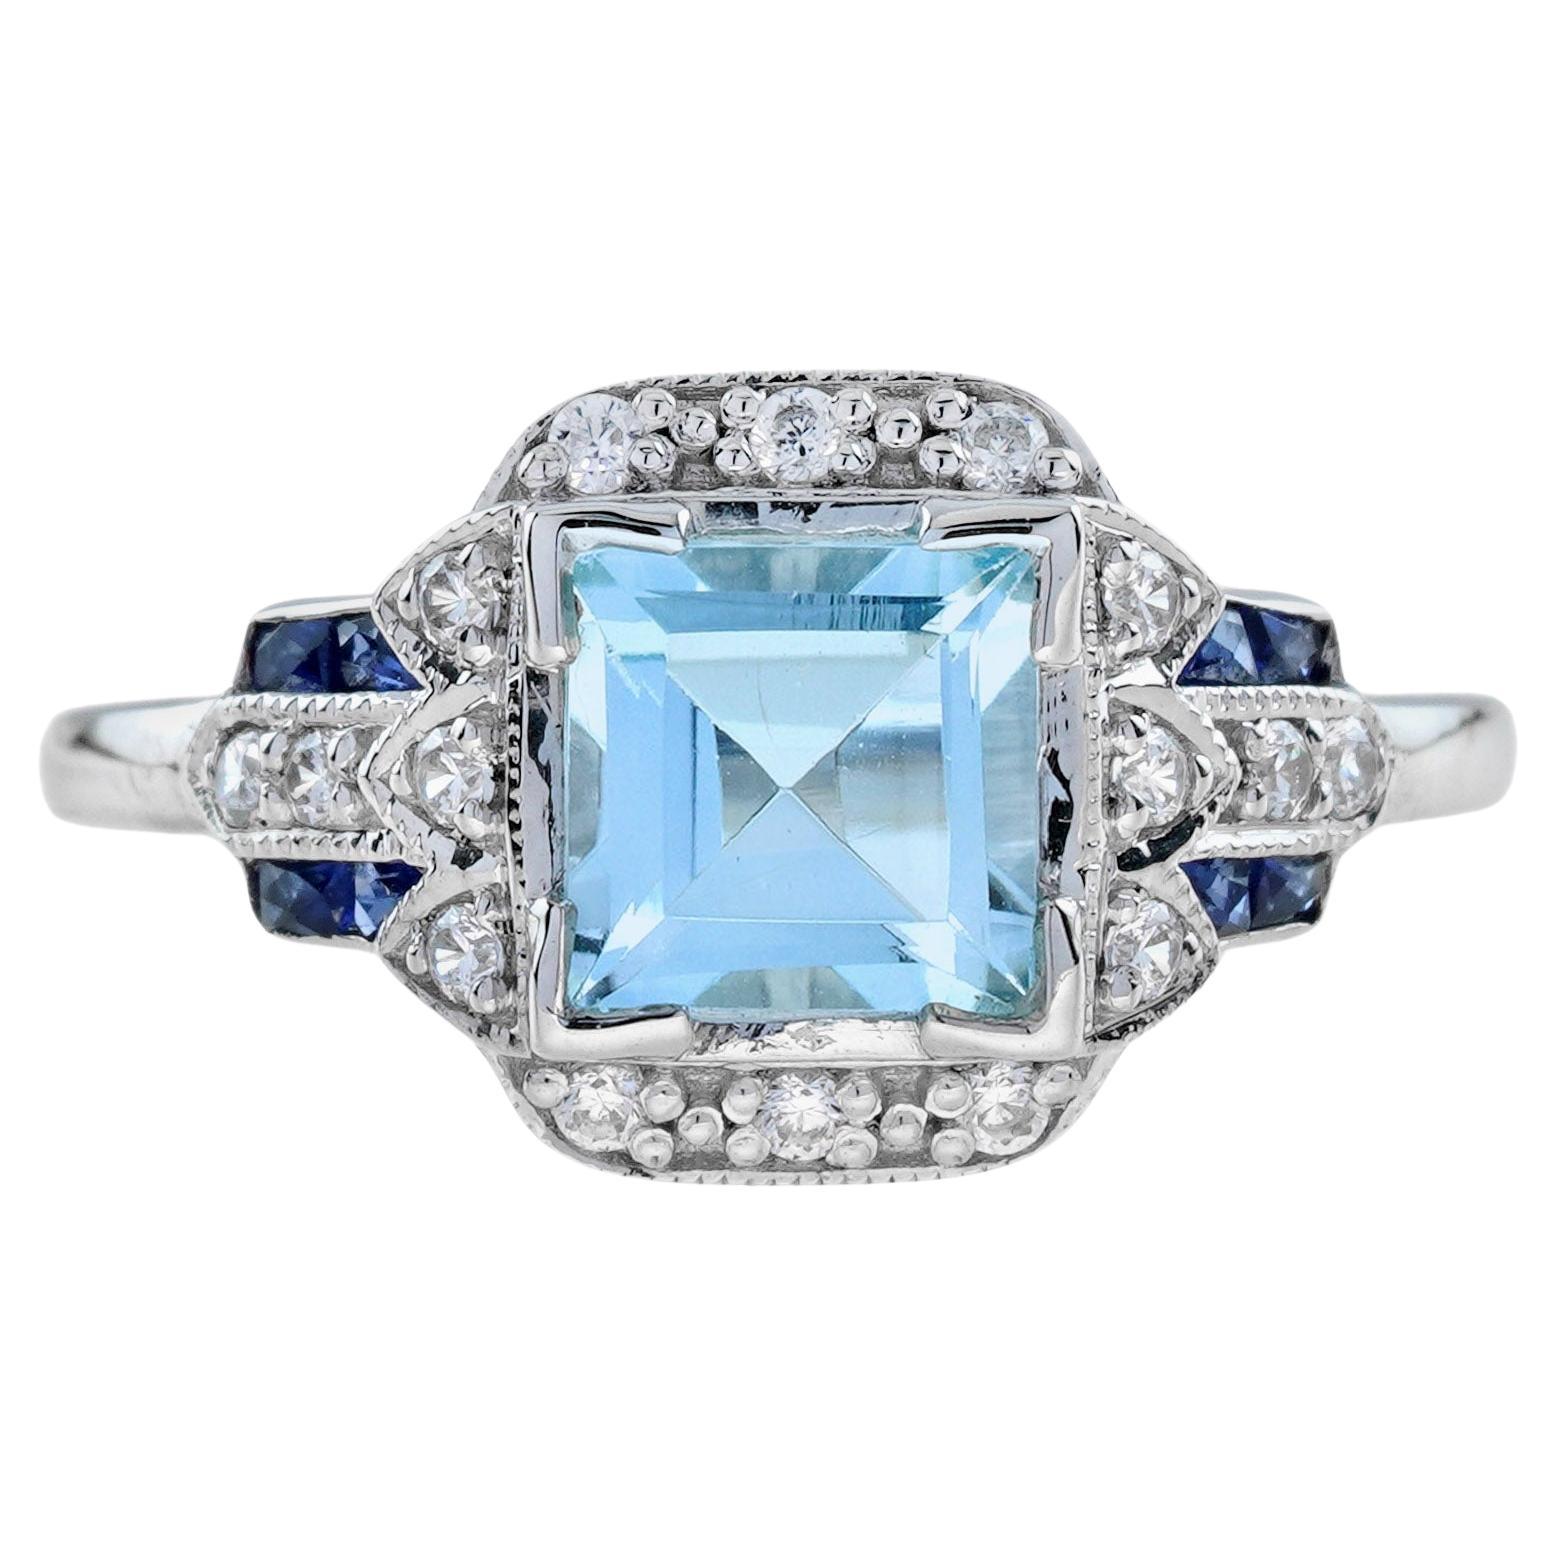 For Sale:  Square Blue Topaz Sapphire Diamond Art Deco Style Engagement Ring in 14K Gold